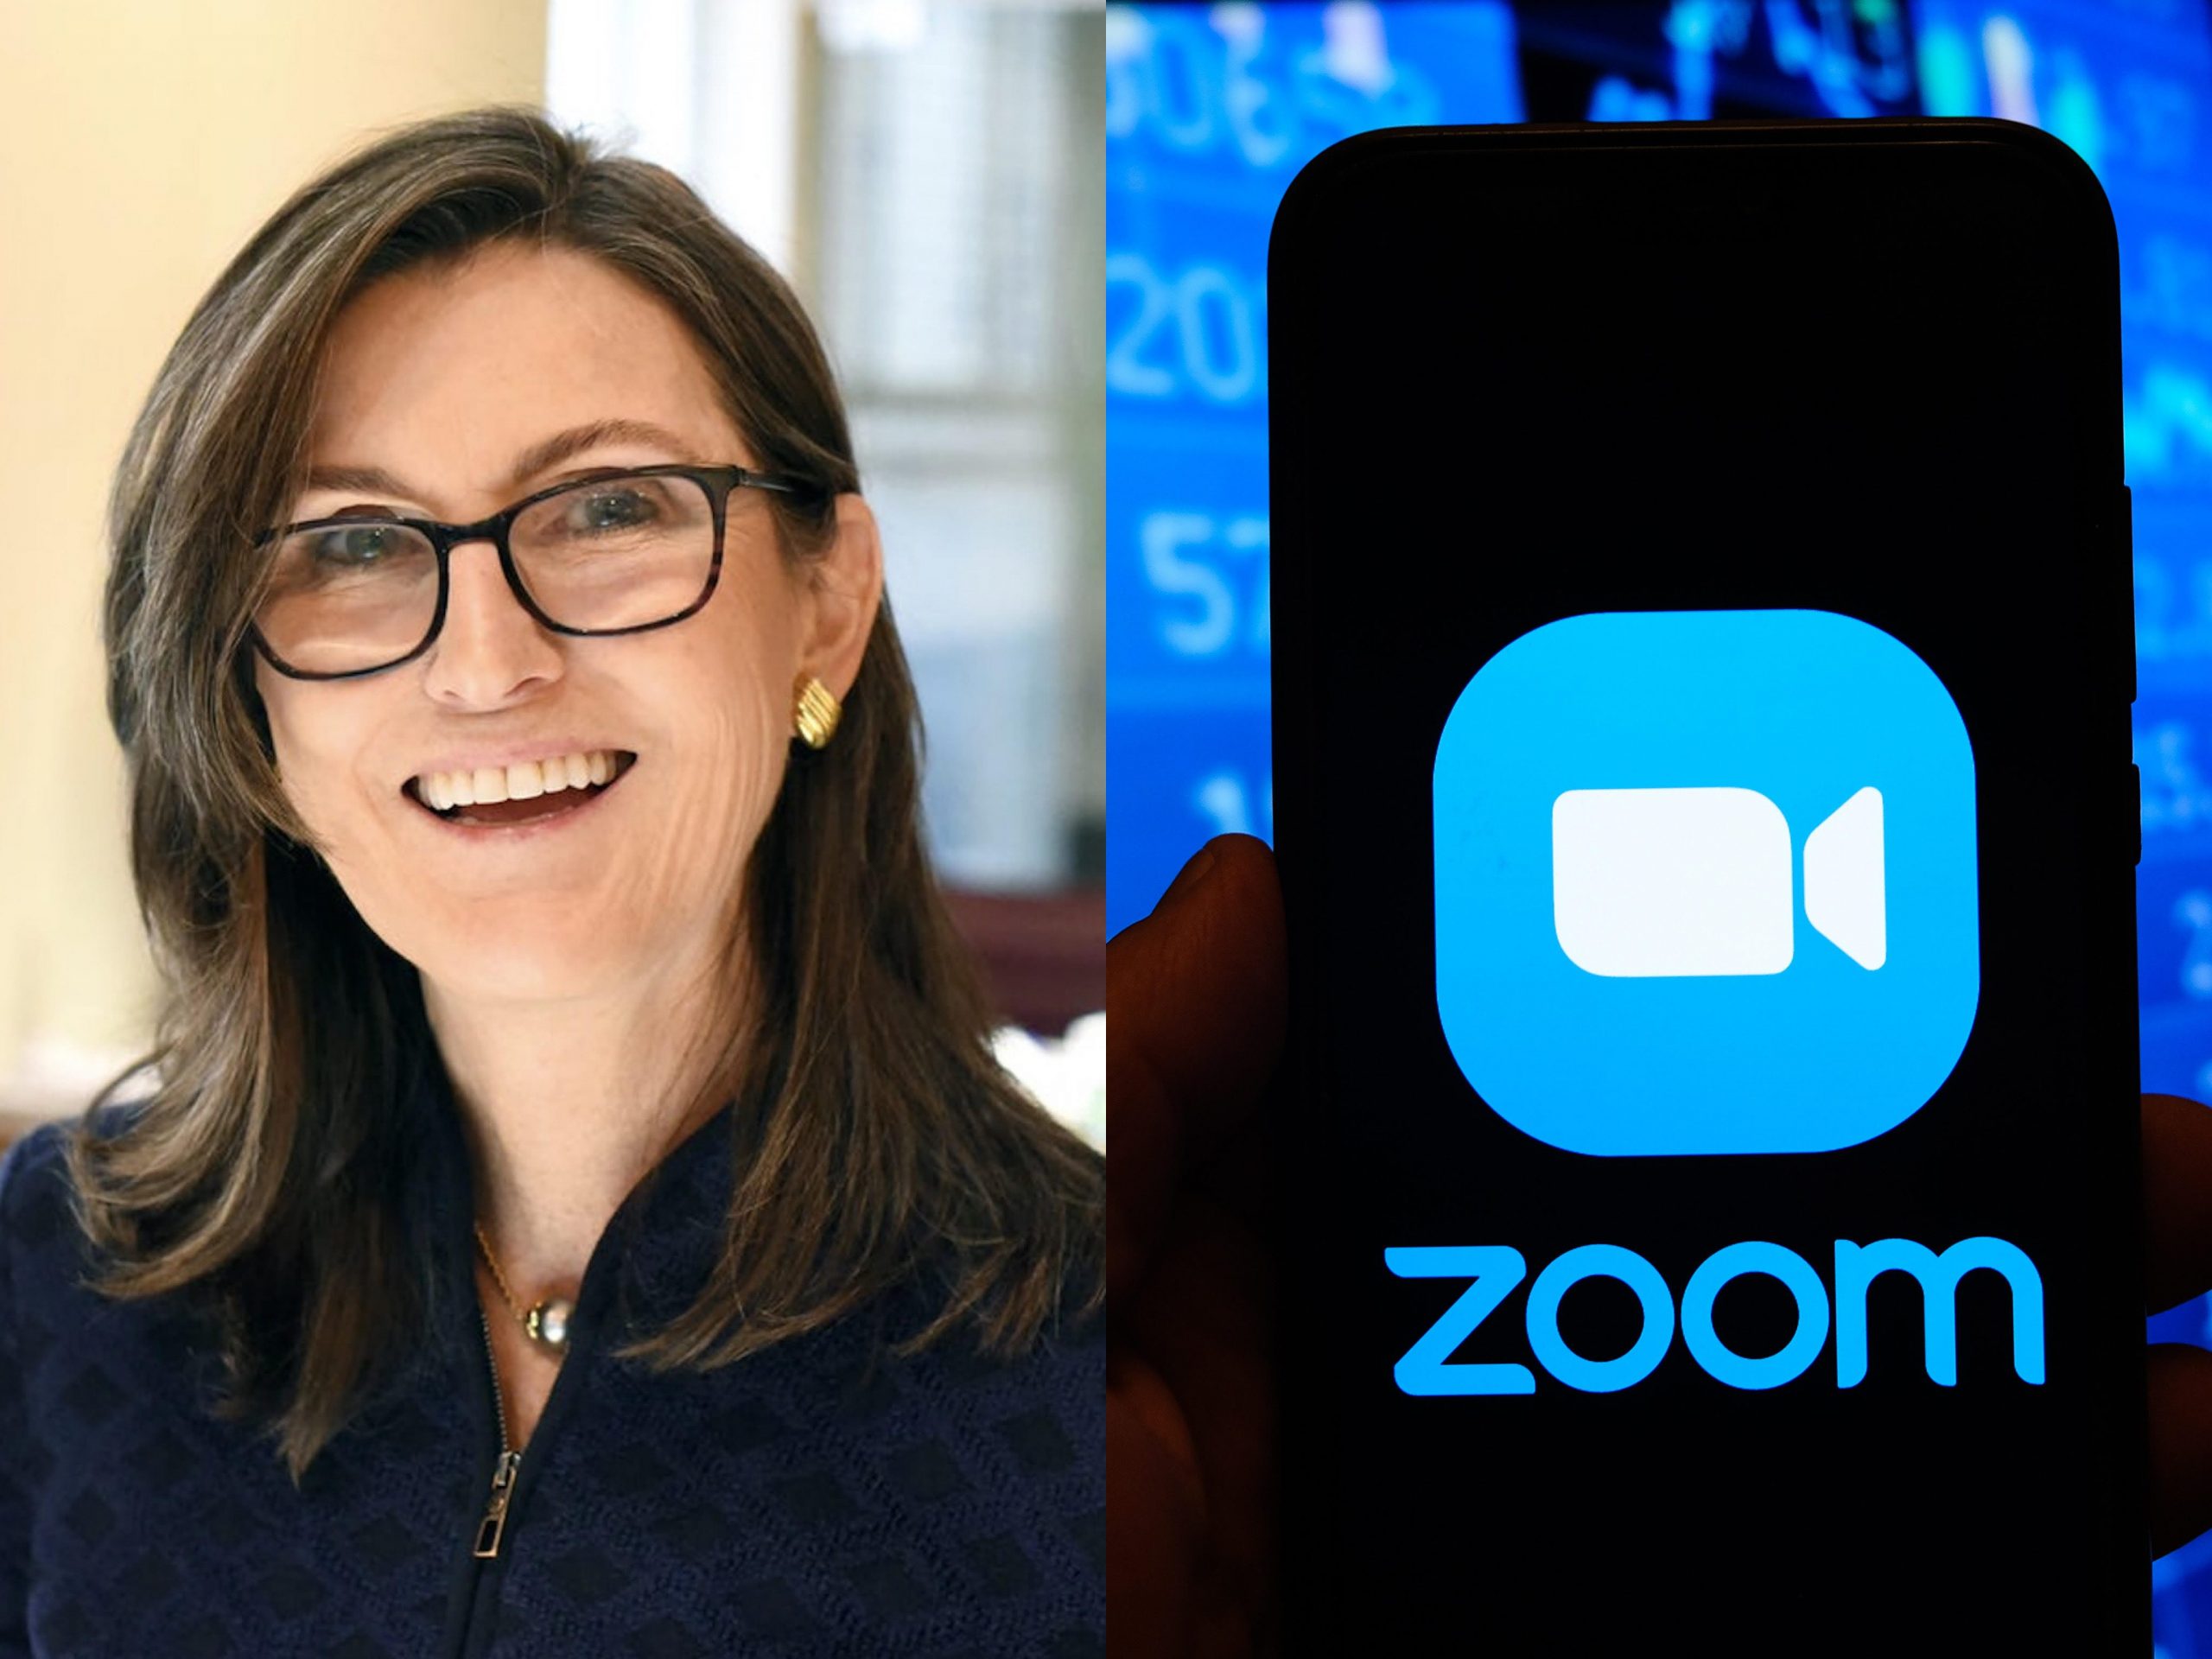 In this photo illustration a multiple exposure image shows a Zoom video logo displayed on a smartphone with stock market percentages in the background.